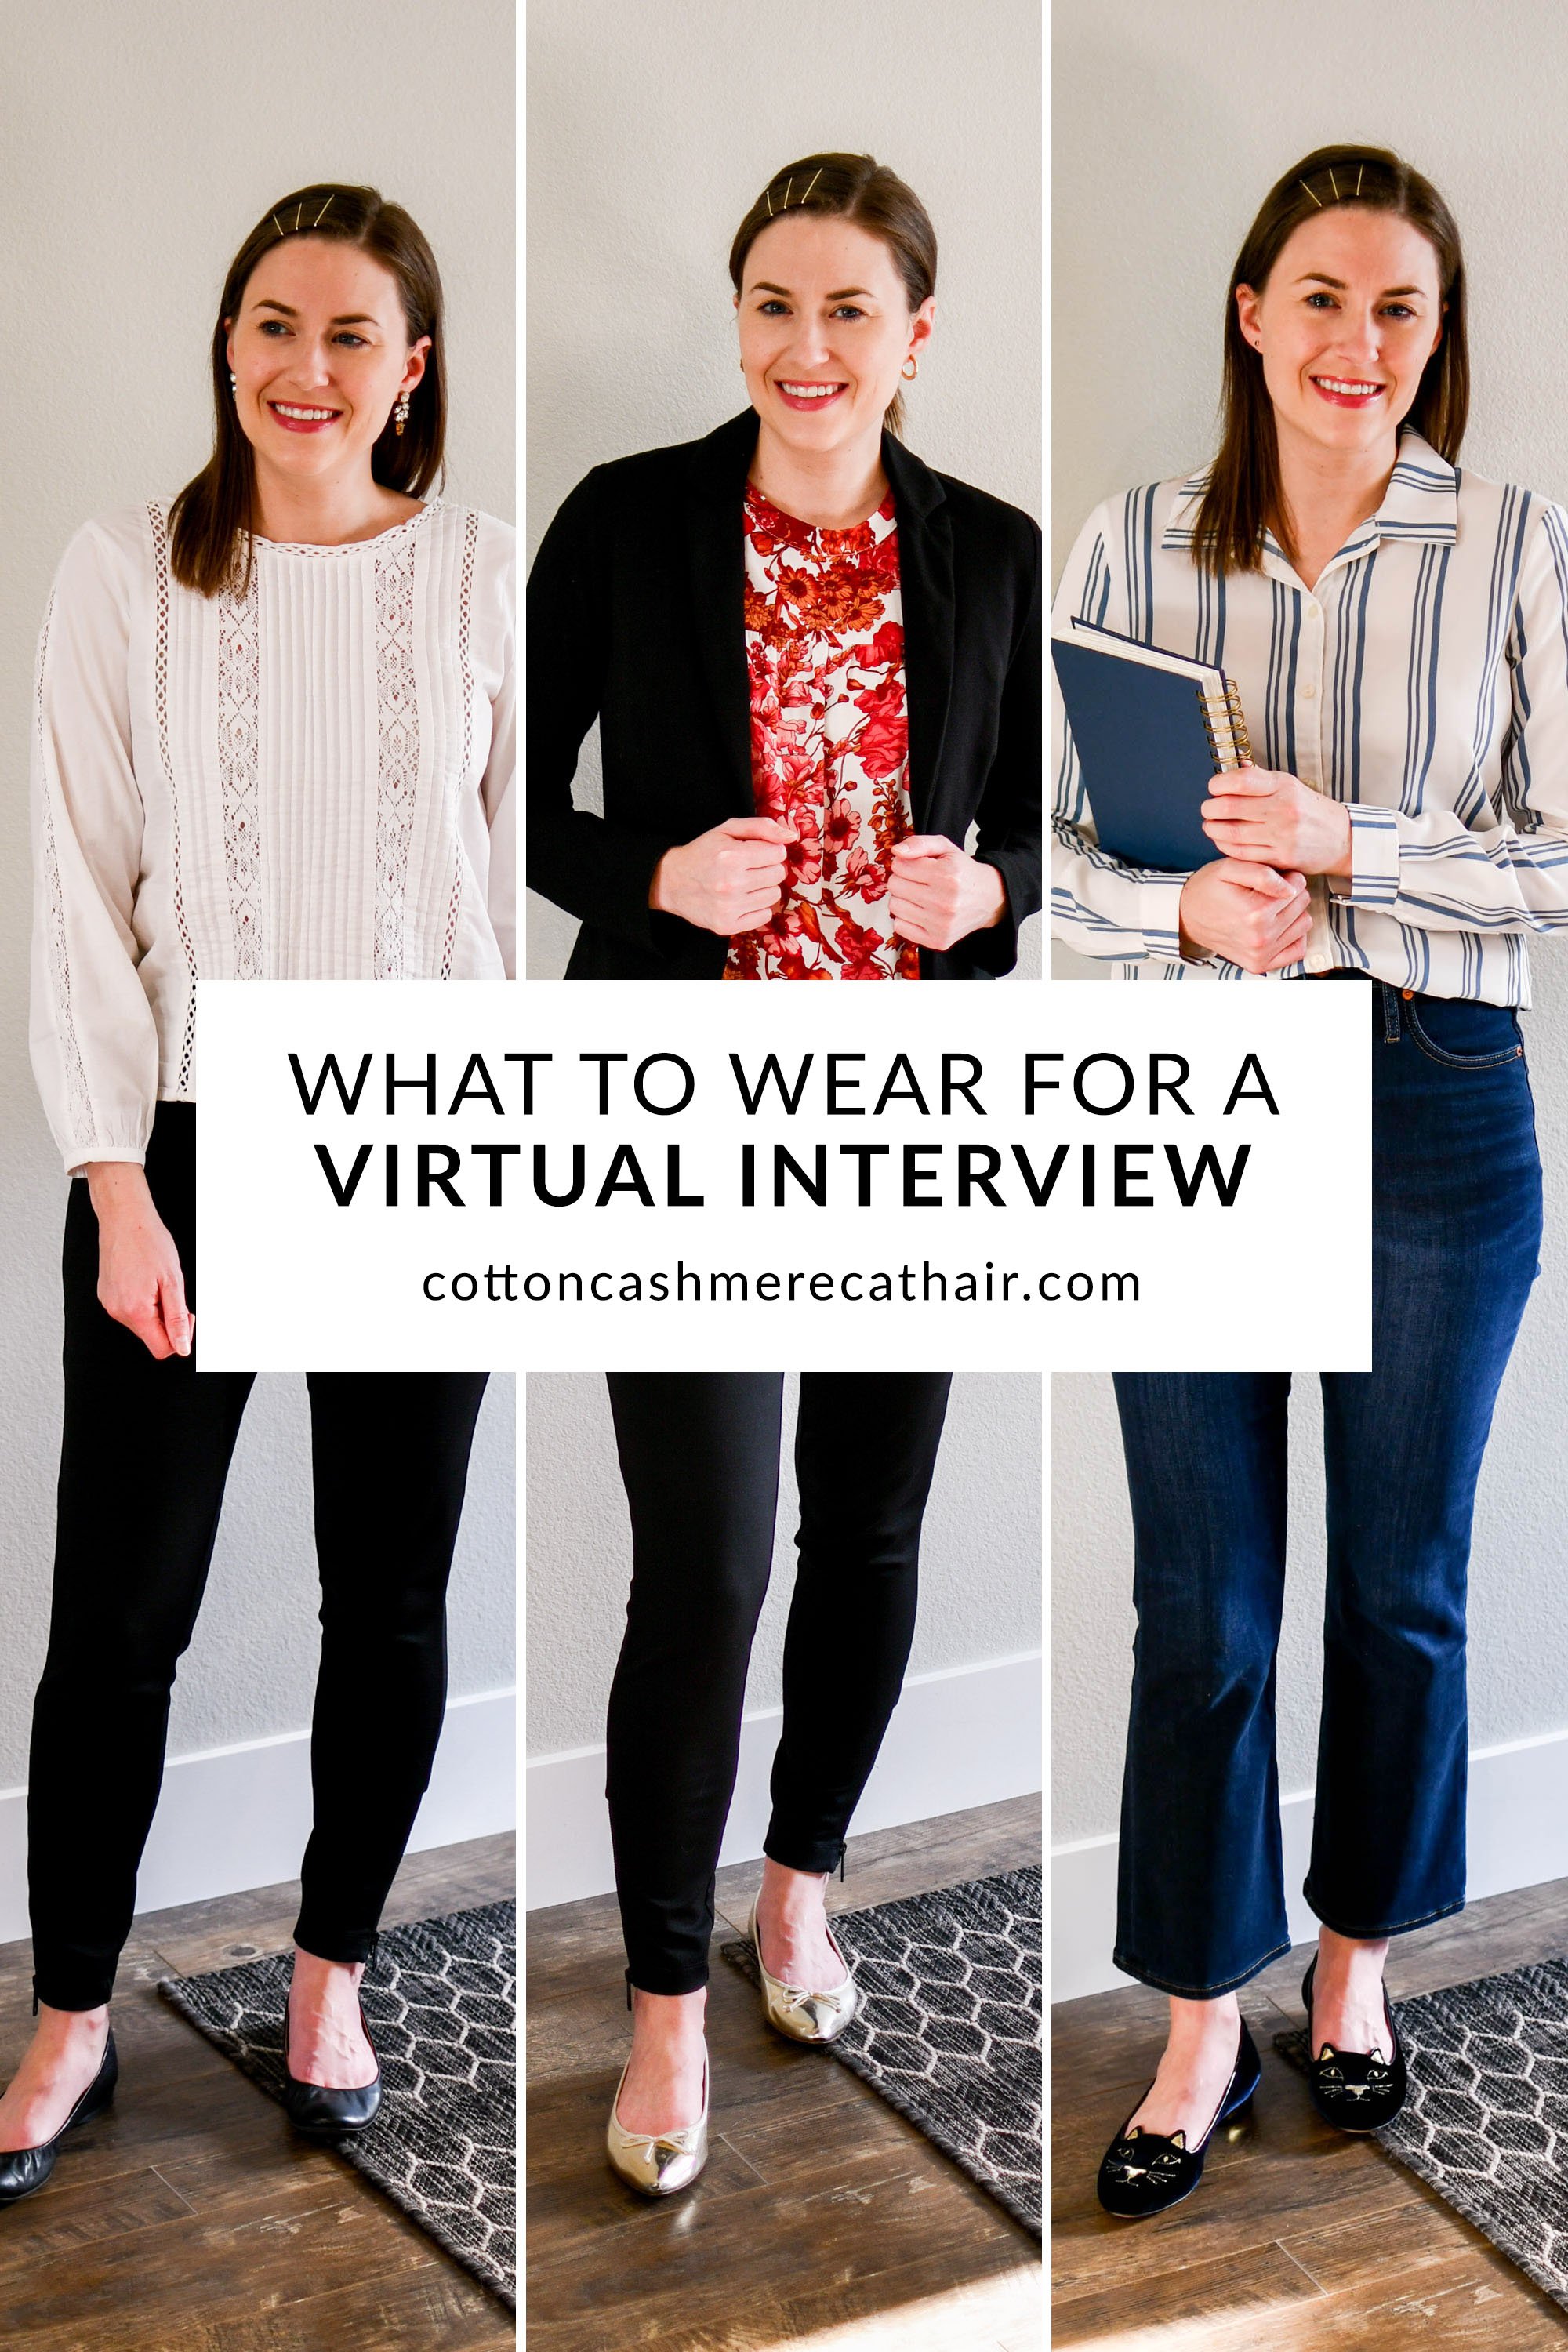 Can You Wear A Dress And Leggings To An Interview